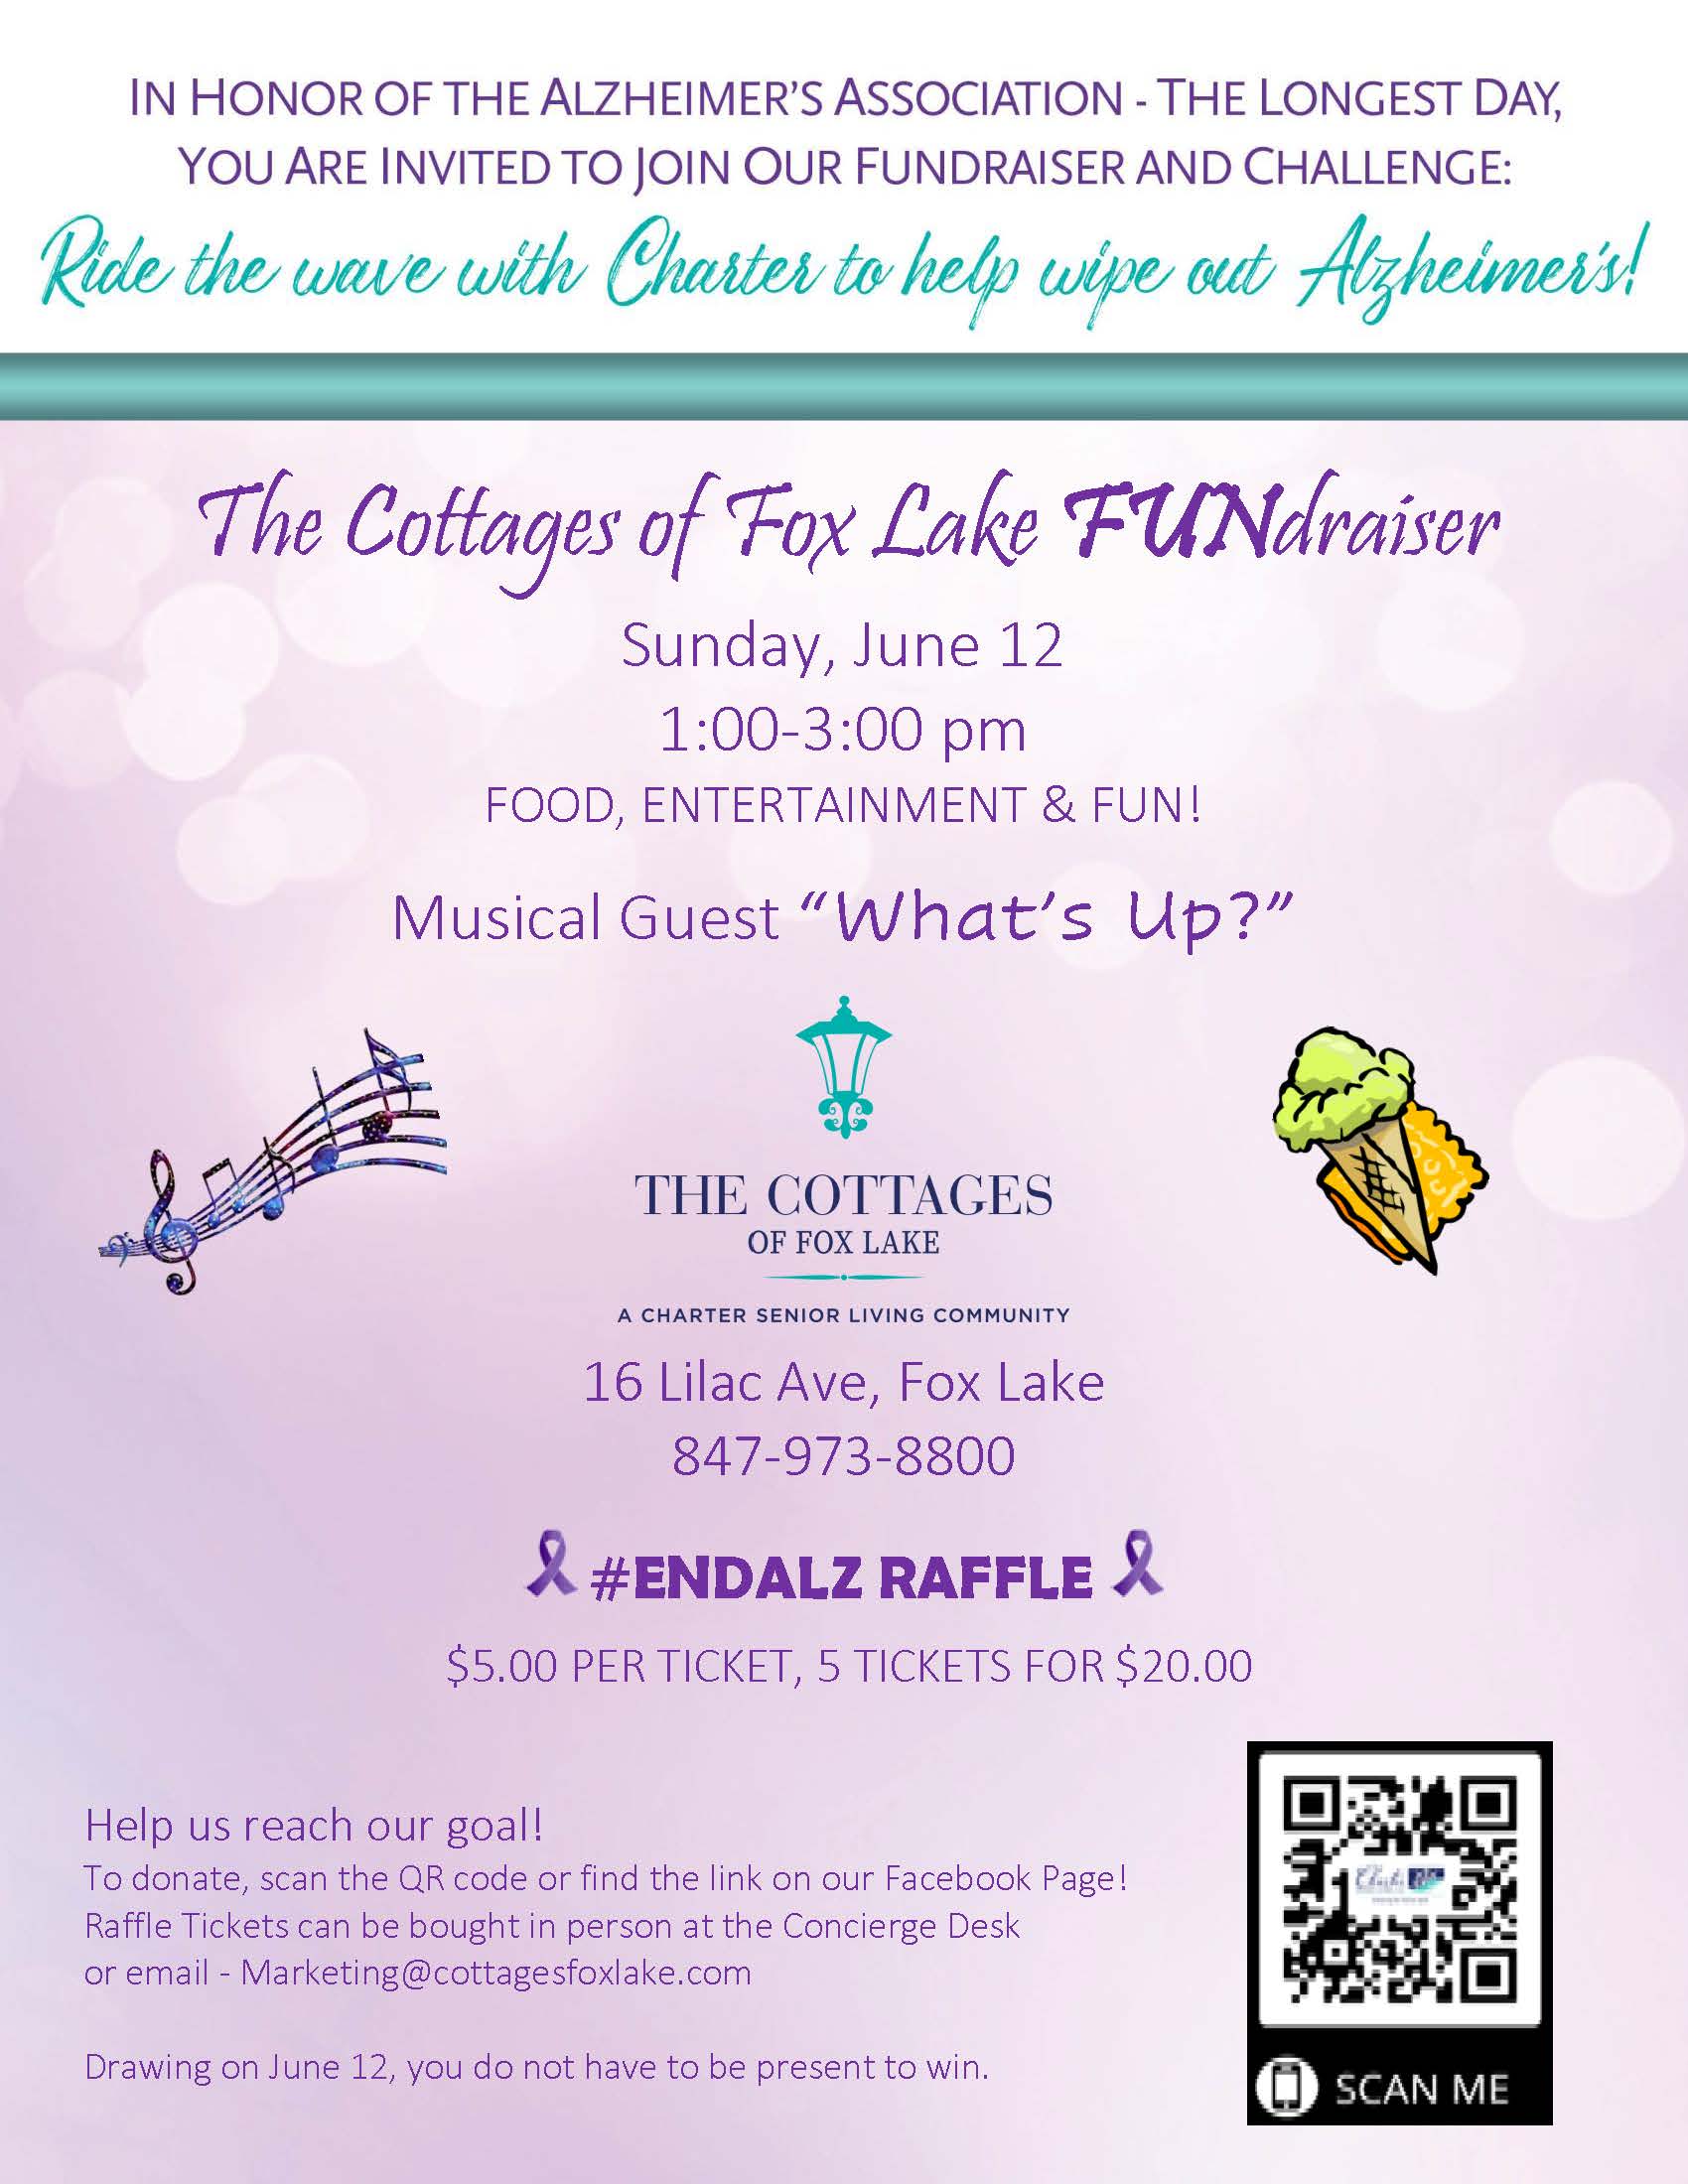 Cottages of Fox Lake - Assisted Living and Memory Care - Fundraiser